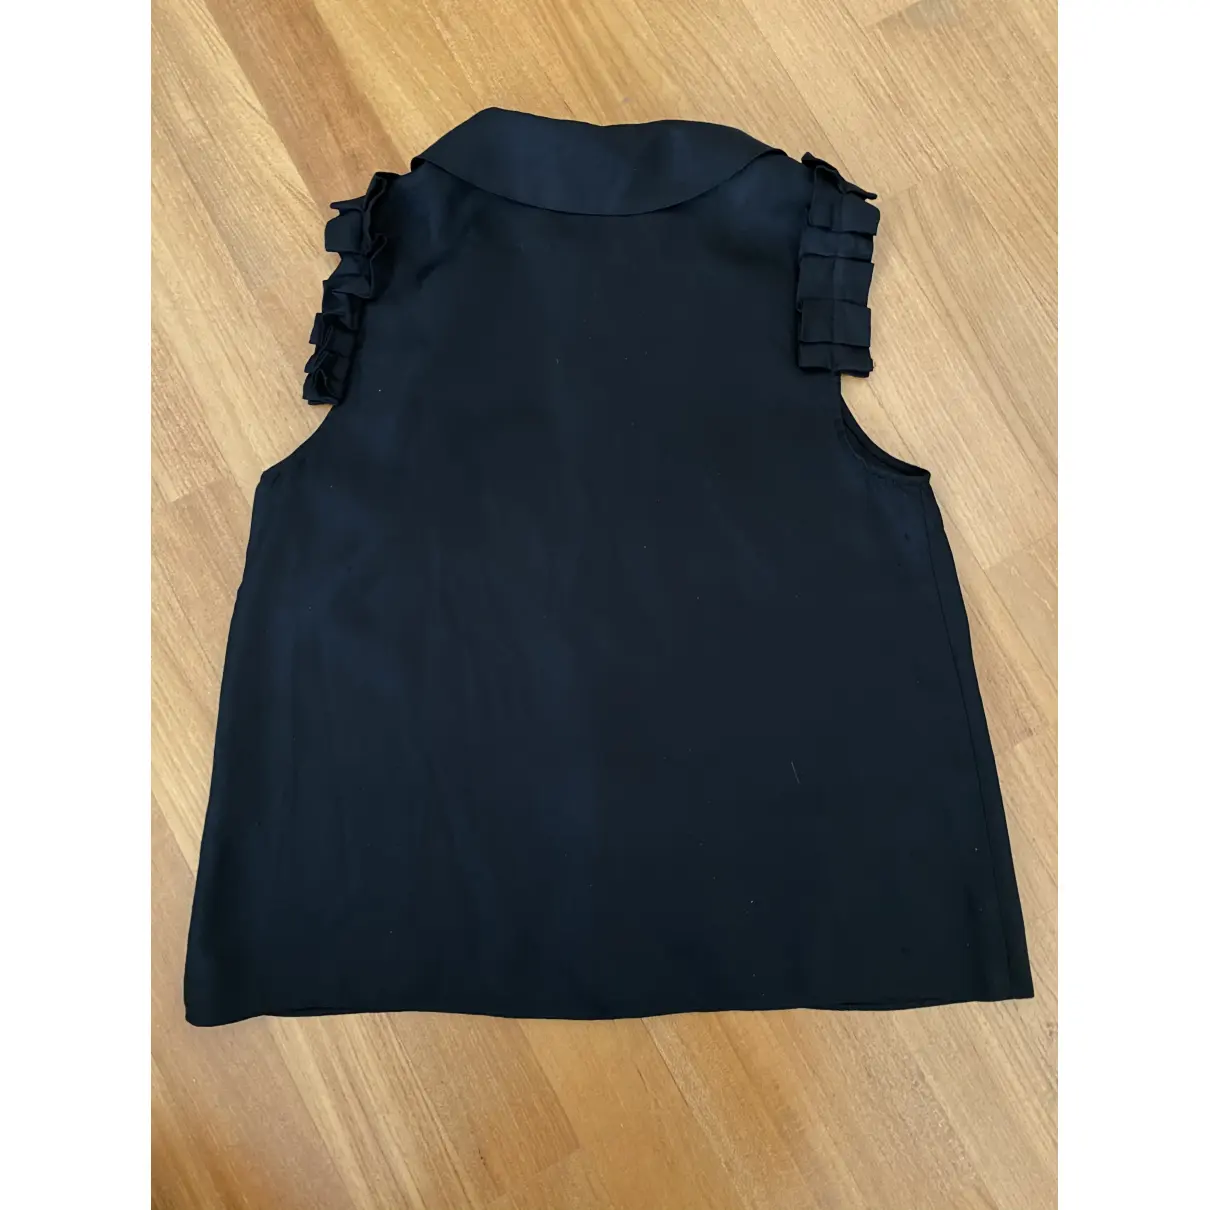 Buy Marc by Marc Jacobs Silk blouse online